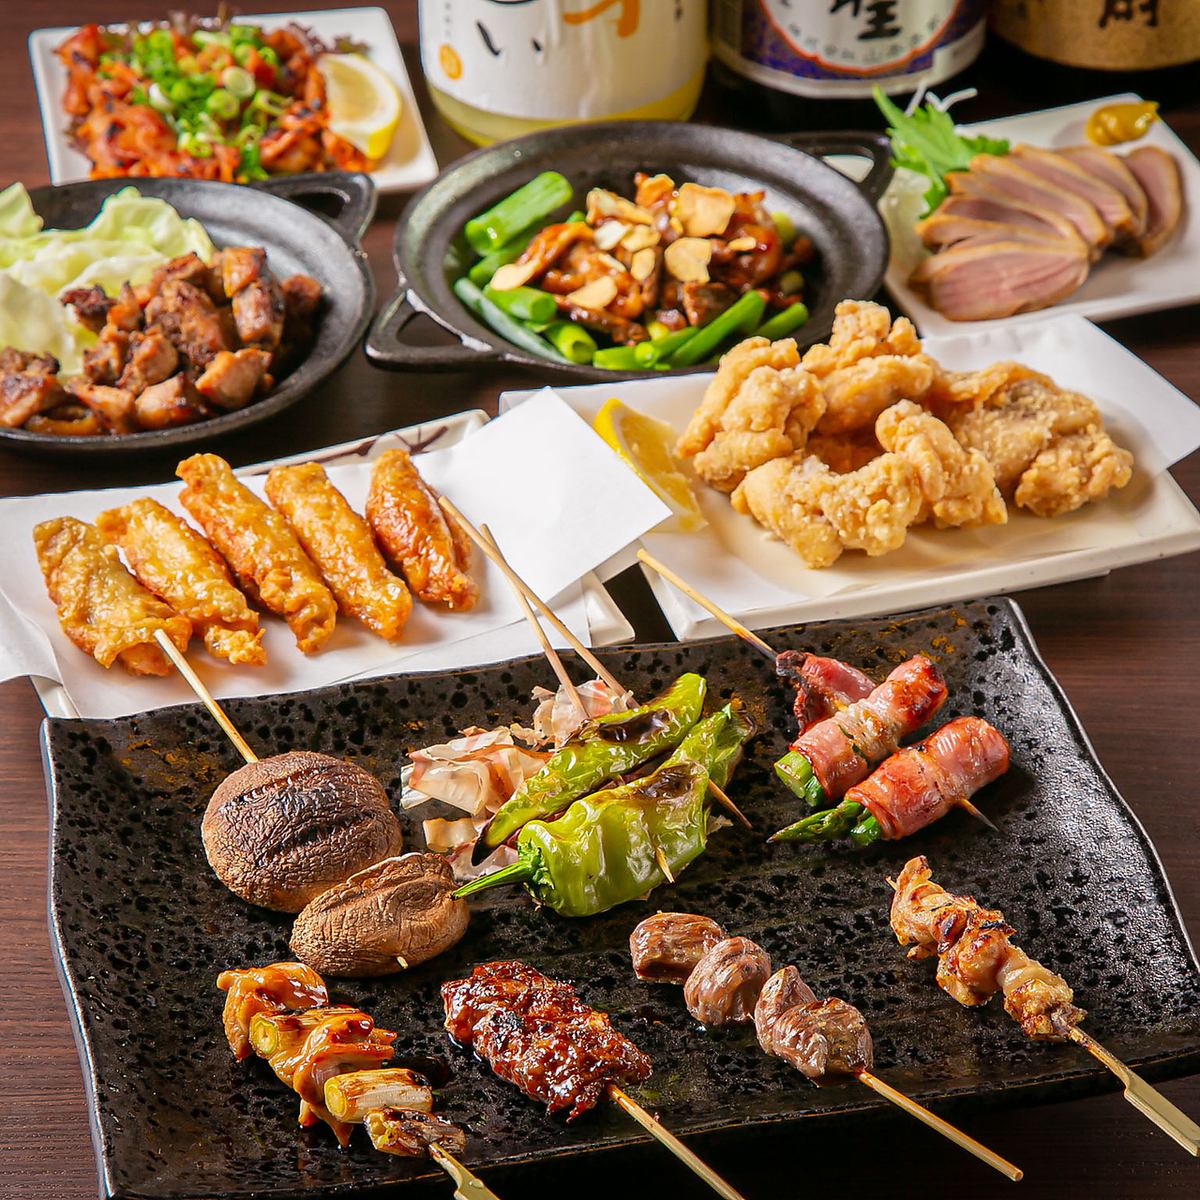 If you want to enjoy exquisite chicken dishes ... Please come to Kyoto's long-established yakitori restaurant "Torisei" ♪